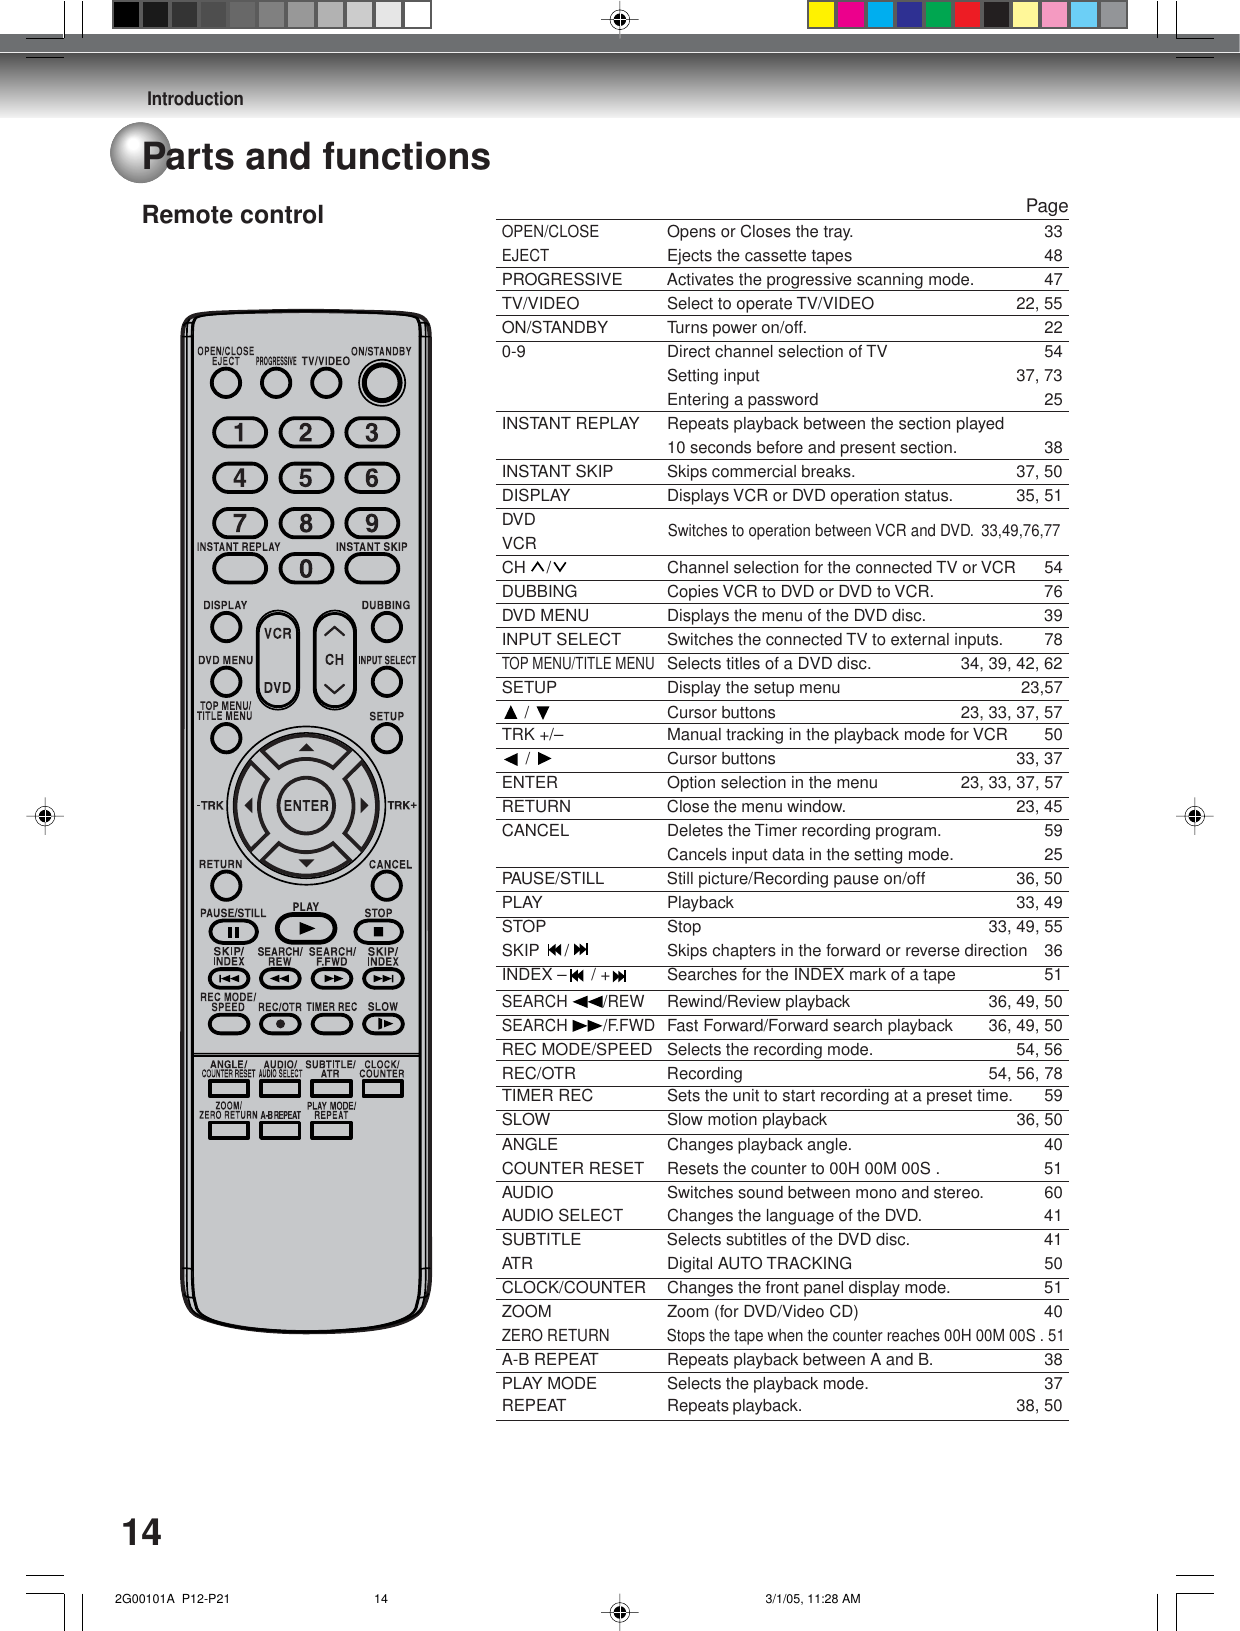 Introduction14OPEN/CLOSEOpens or Closes the tray. 33EJECTEjects the cassette tapes 48PROGRESSIVE Activates the progressive scanning mode. 47TV/VIDEO Select to operate TV/VIDEO 22, 55ON/STANDBY Turns power on/off. 220-9 Direct channel selection of TV 54Setting input 37, 73Entering a password 25INSTANT REPLAY Repeats playback between the section played10 seconds before and present section. 38INSTANT SKIP Skips commercial breaks. 37, 50DISPLAY Displays VCR or DVD operation status. 35, 51DVDVCRCH / Channel selection for the connected TV or VCR 54DUBBING Copies VCR to DVD or DVD to VCR. 76DVD MENU Displays the menu of the DVD disc. 39INPUT SELECT Switches the connected TV to external inputs. 78TOP MENU/TITLE MENUSelects titles of a DVD disc. 34, 39, 42, 62SETUP Display the setup menu 23,57 /  Cursor buttons 23, 33, 37, 57TRK +/– Manual tracking in the playback mode for VCR 50 /  Cursor buttons 33, 37ENTER Option selection in the menu 23, 33, 37, 57RETURN Close the menu window. 23, 45CANCEL Deletes the Timer recording program. 59Cancels input data in the setting mode. 25PAUSE/STILL Still picture/Recording pause on/off 36, 50PLAY Playback 33, 49STOP Stop 33, 49, 55SKIP / Skips chapters in the forward or reverse direction 36INDEX –  / + Searches for the INDEX mark of a tape 51SEARCH /REWRewind/Review playback 36, 49, 50SEARCH /F.FWDFast Forward/Forward search playback 36, 49, 50REC MODE/SPEED Selects the recording mode. 54, 56REC/OTR Recording 54, 56, 78TIMER REC Sets the unit to start recording at a preset time. 59SLOW Slow motion playback  36, 50ANGLE Changes playback angle. 40COUNTER RESET Resets the counter to 00H 00M 00S . 51AUDIO Switches sound between mono and stereo. 60AUDIO SELECT Changes the language of the DVD. 41SUBTITLE Selects subtitles of the DVD disc. 41ATR Digital AUTO TRACKING 50CLOCK/COUNTER Changes the front panel display mode. 51ZOOM Zoom (for DVD/Video CD) 40ZERO RETURN Stops the tape when the counter reaches 00H 00M 00S . 51A-B REPEAT Repeats playback between A and B. 38PLAY MODE Selects the playback mode. 37REPEAT Repeats playback. 38, 50Remote control PageParts and functionsSwitches to operation between VCR and DVD. 33,49,76,77 2G00101A  P12-P21 3/1/05, 11:28 AM14